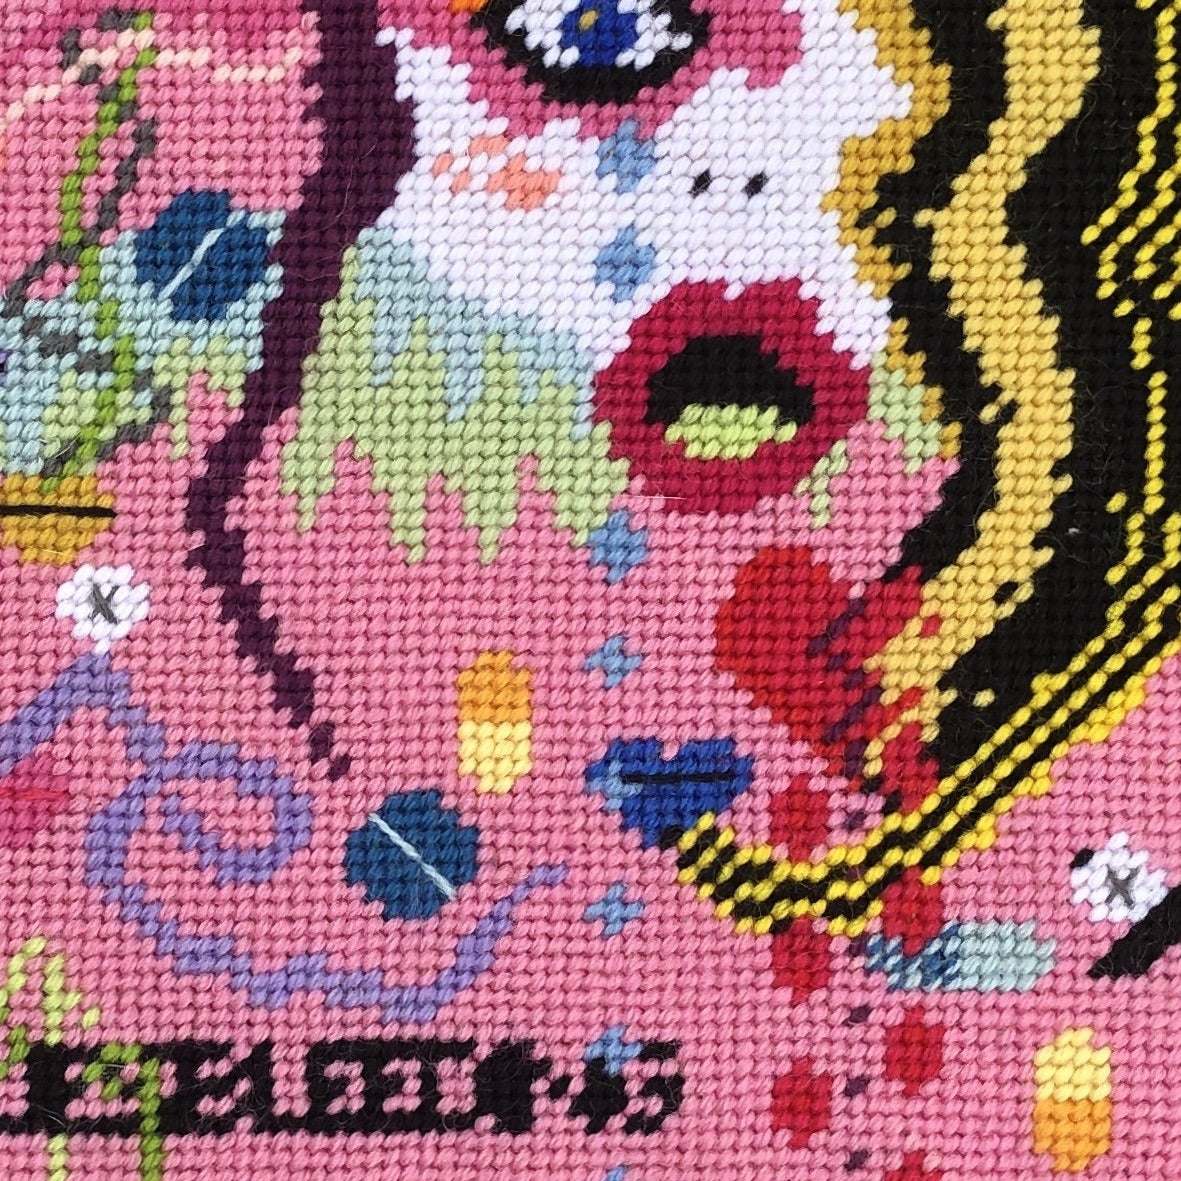 modern woman's face with mouth open;  a smattering of cool snakes with lips; pills; XO .  Super colorful pink velvet background with lots of blues, greens, red hearts.  Super fun pop art!